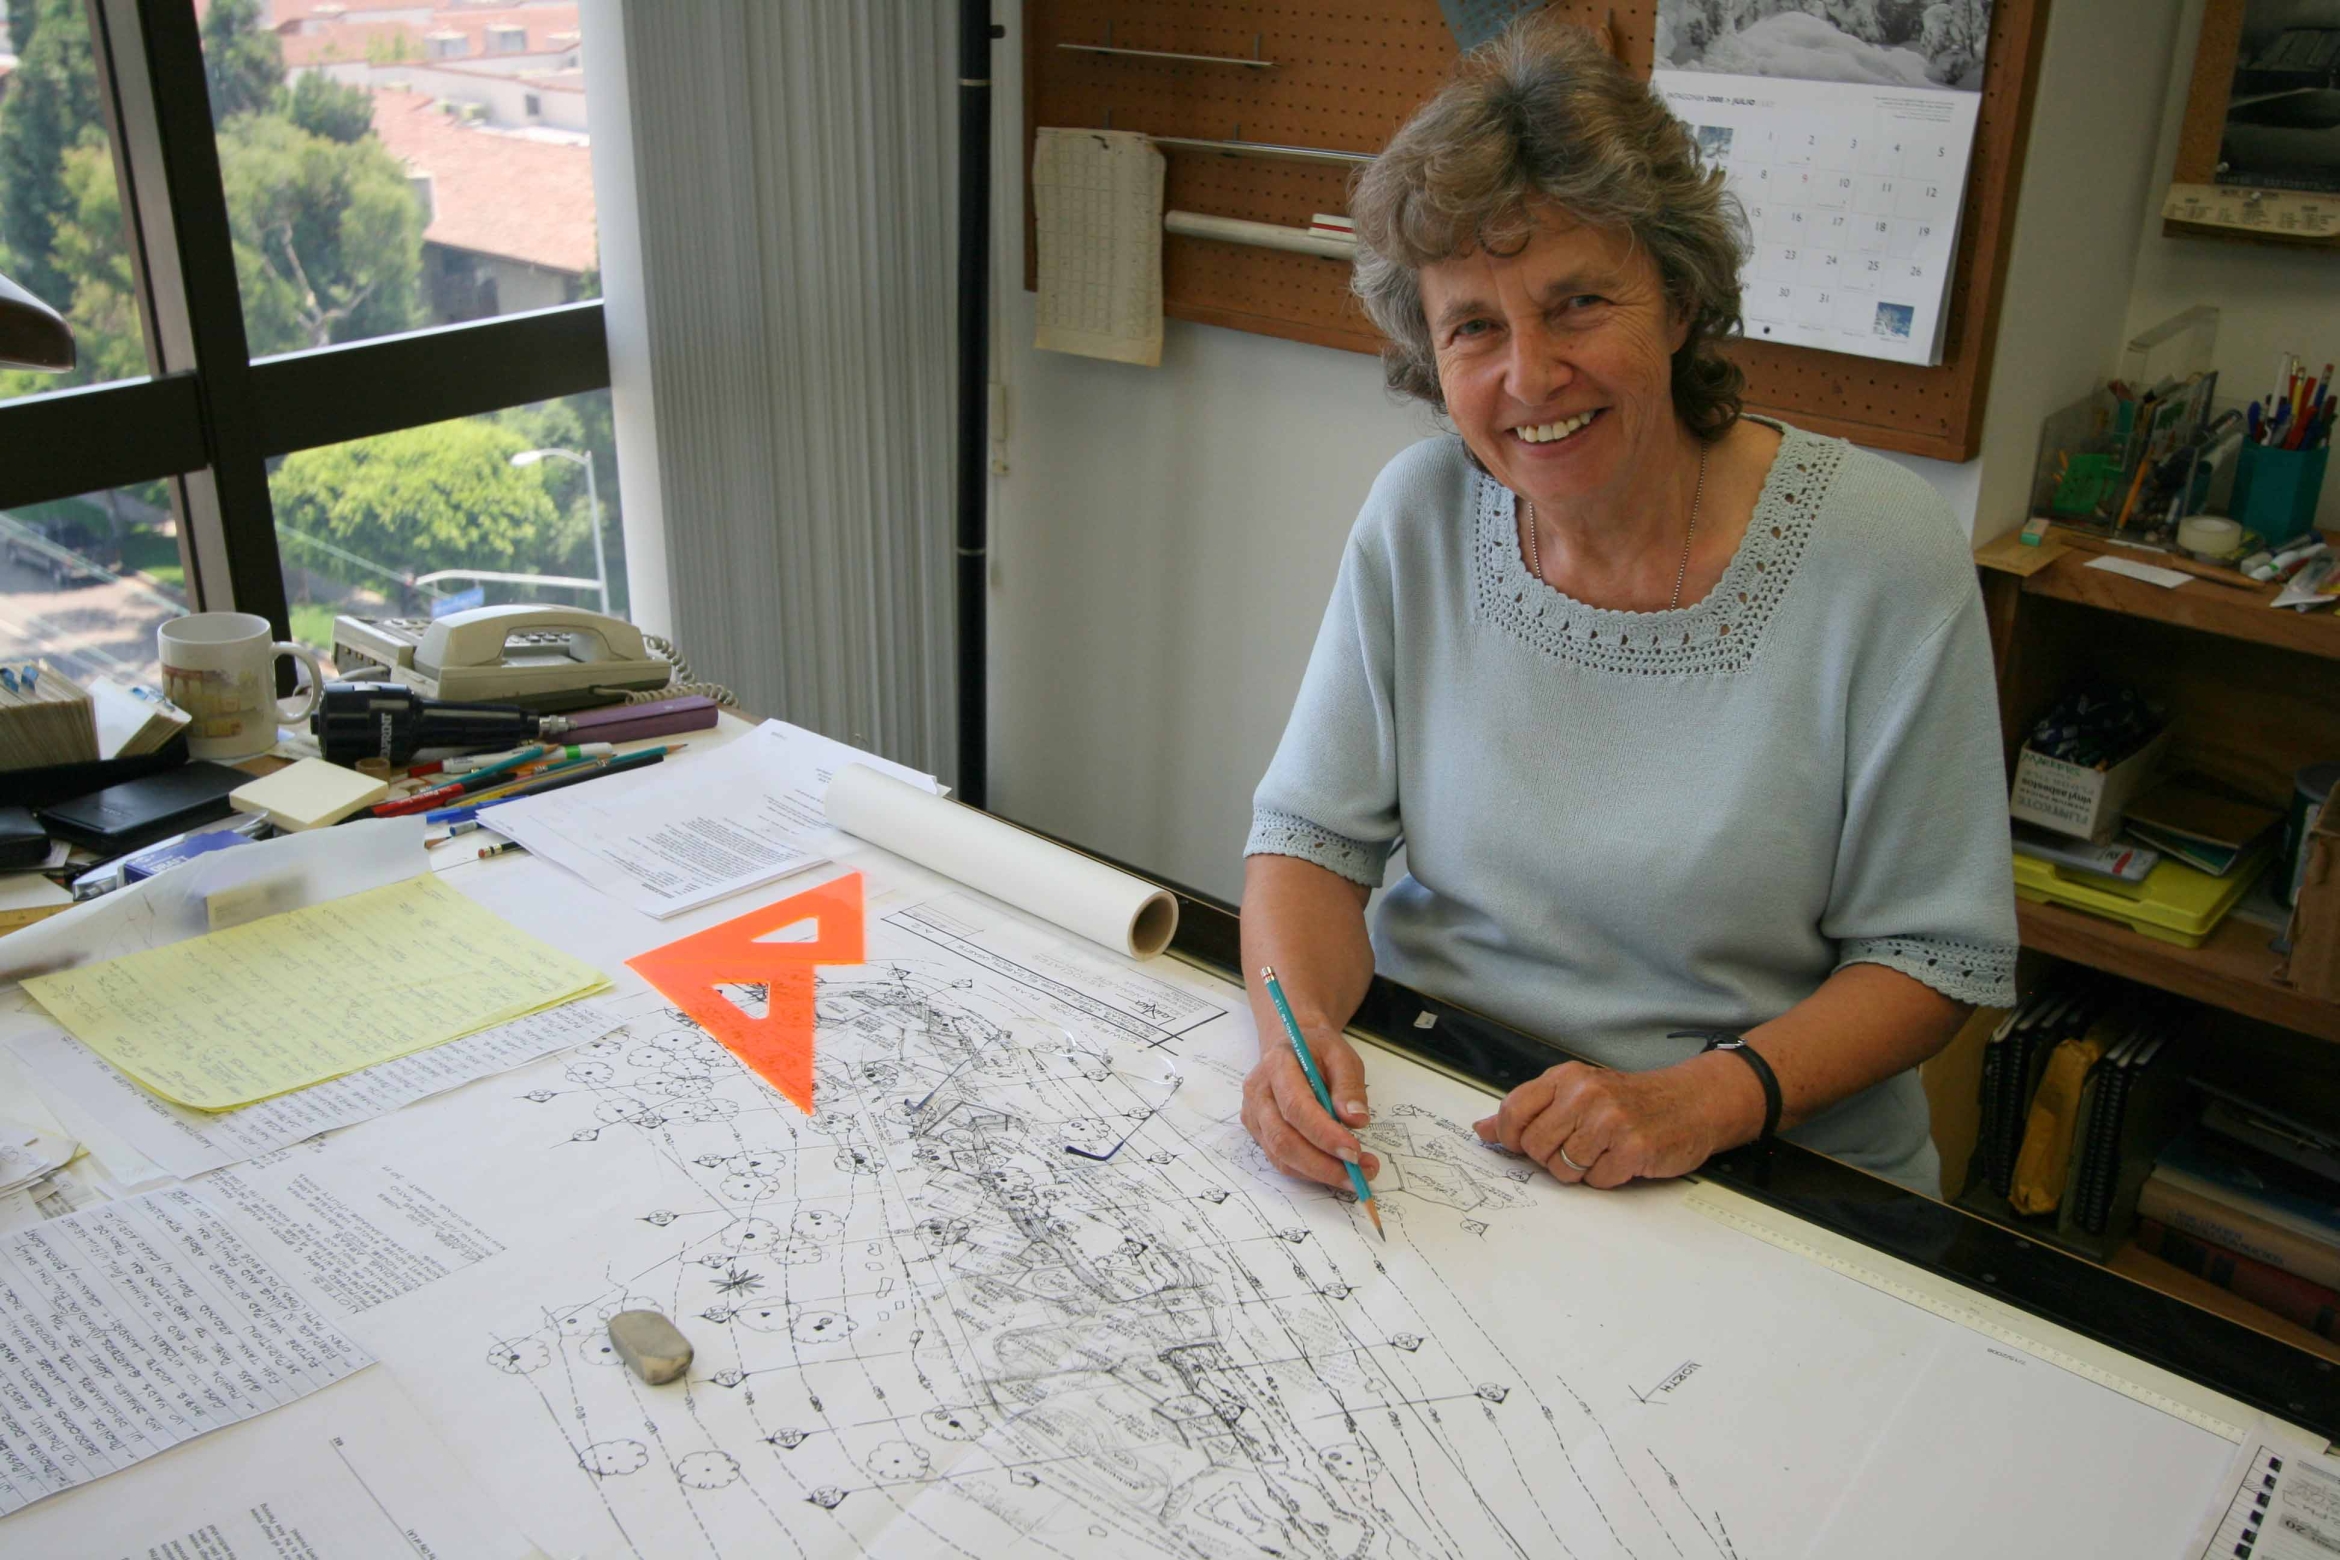 Woman with grey hair at desk with architectural drawings